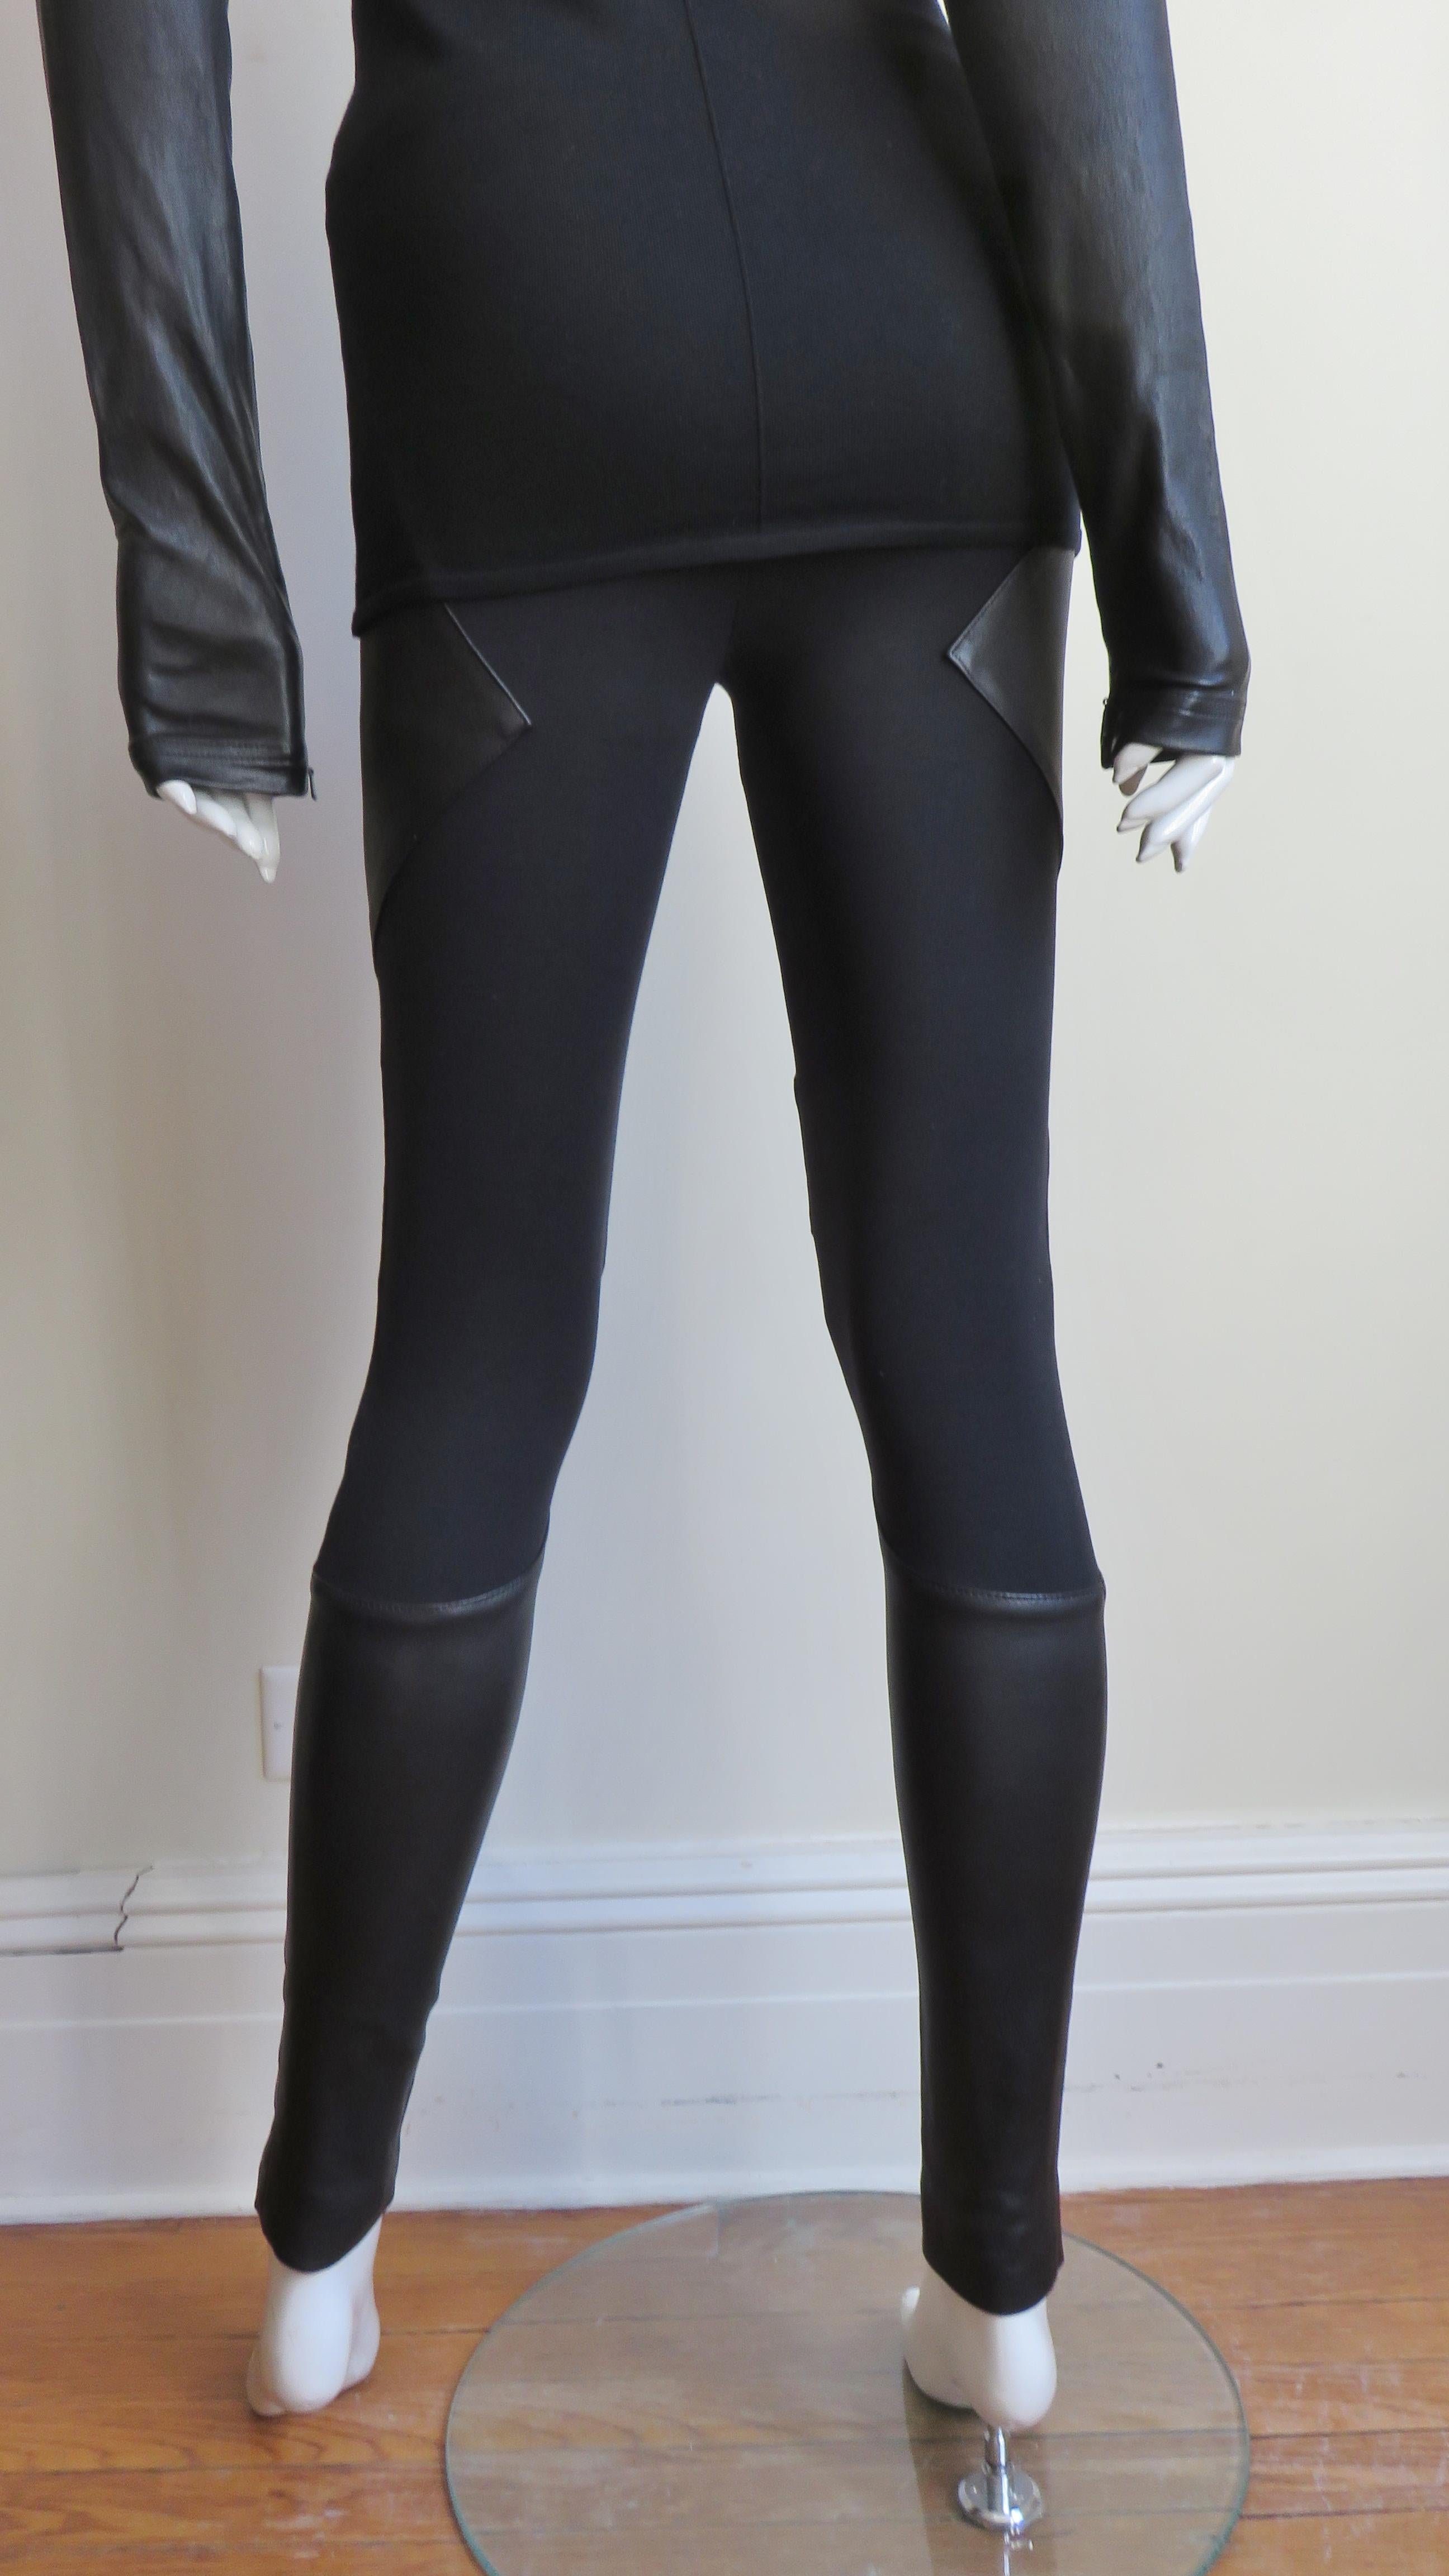 Givenchy Pants and Turtleneck with Leather Insets 6